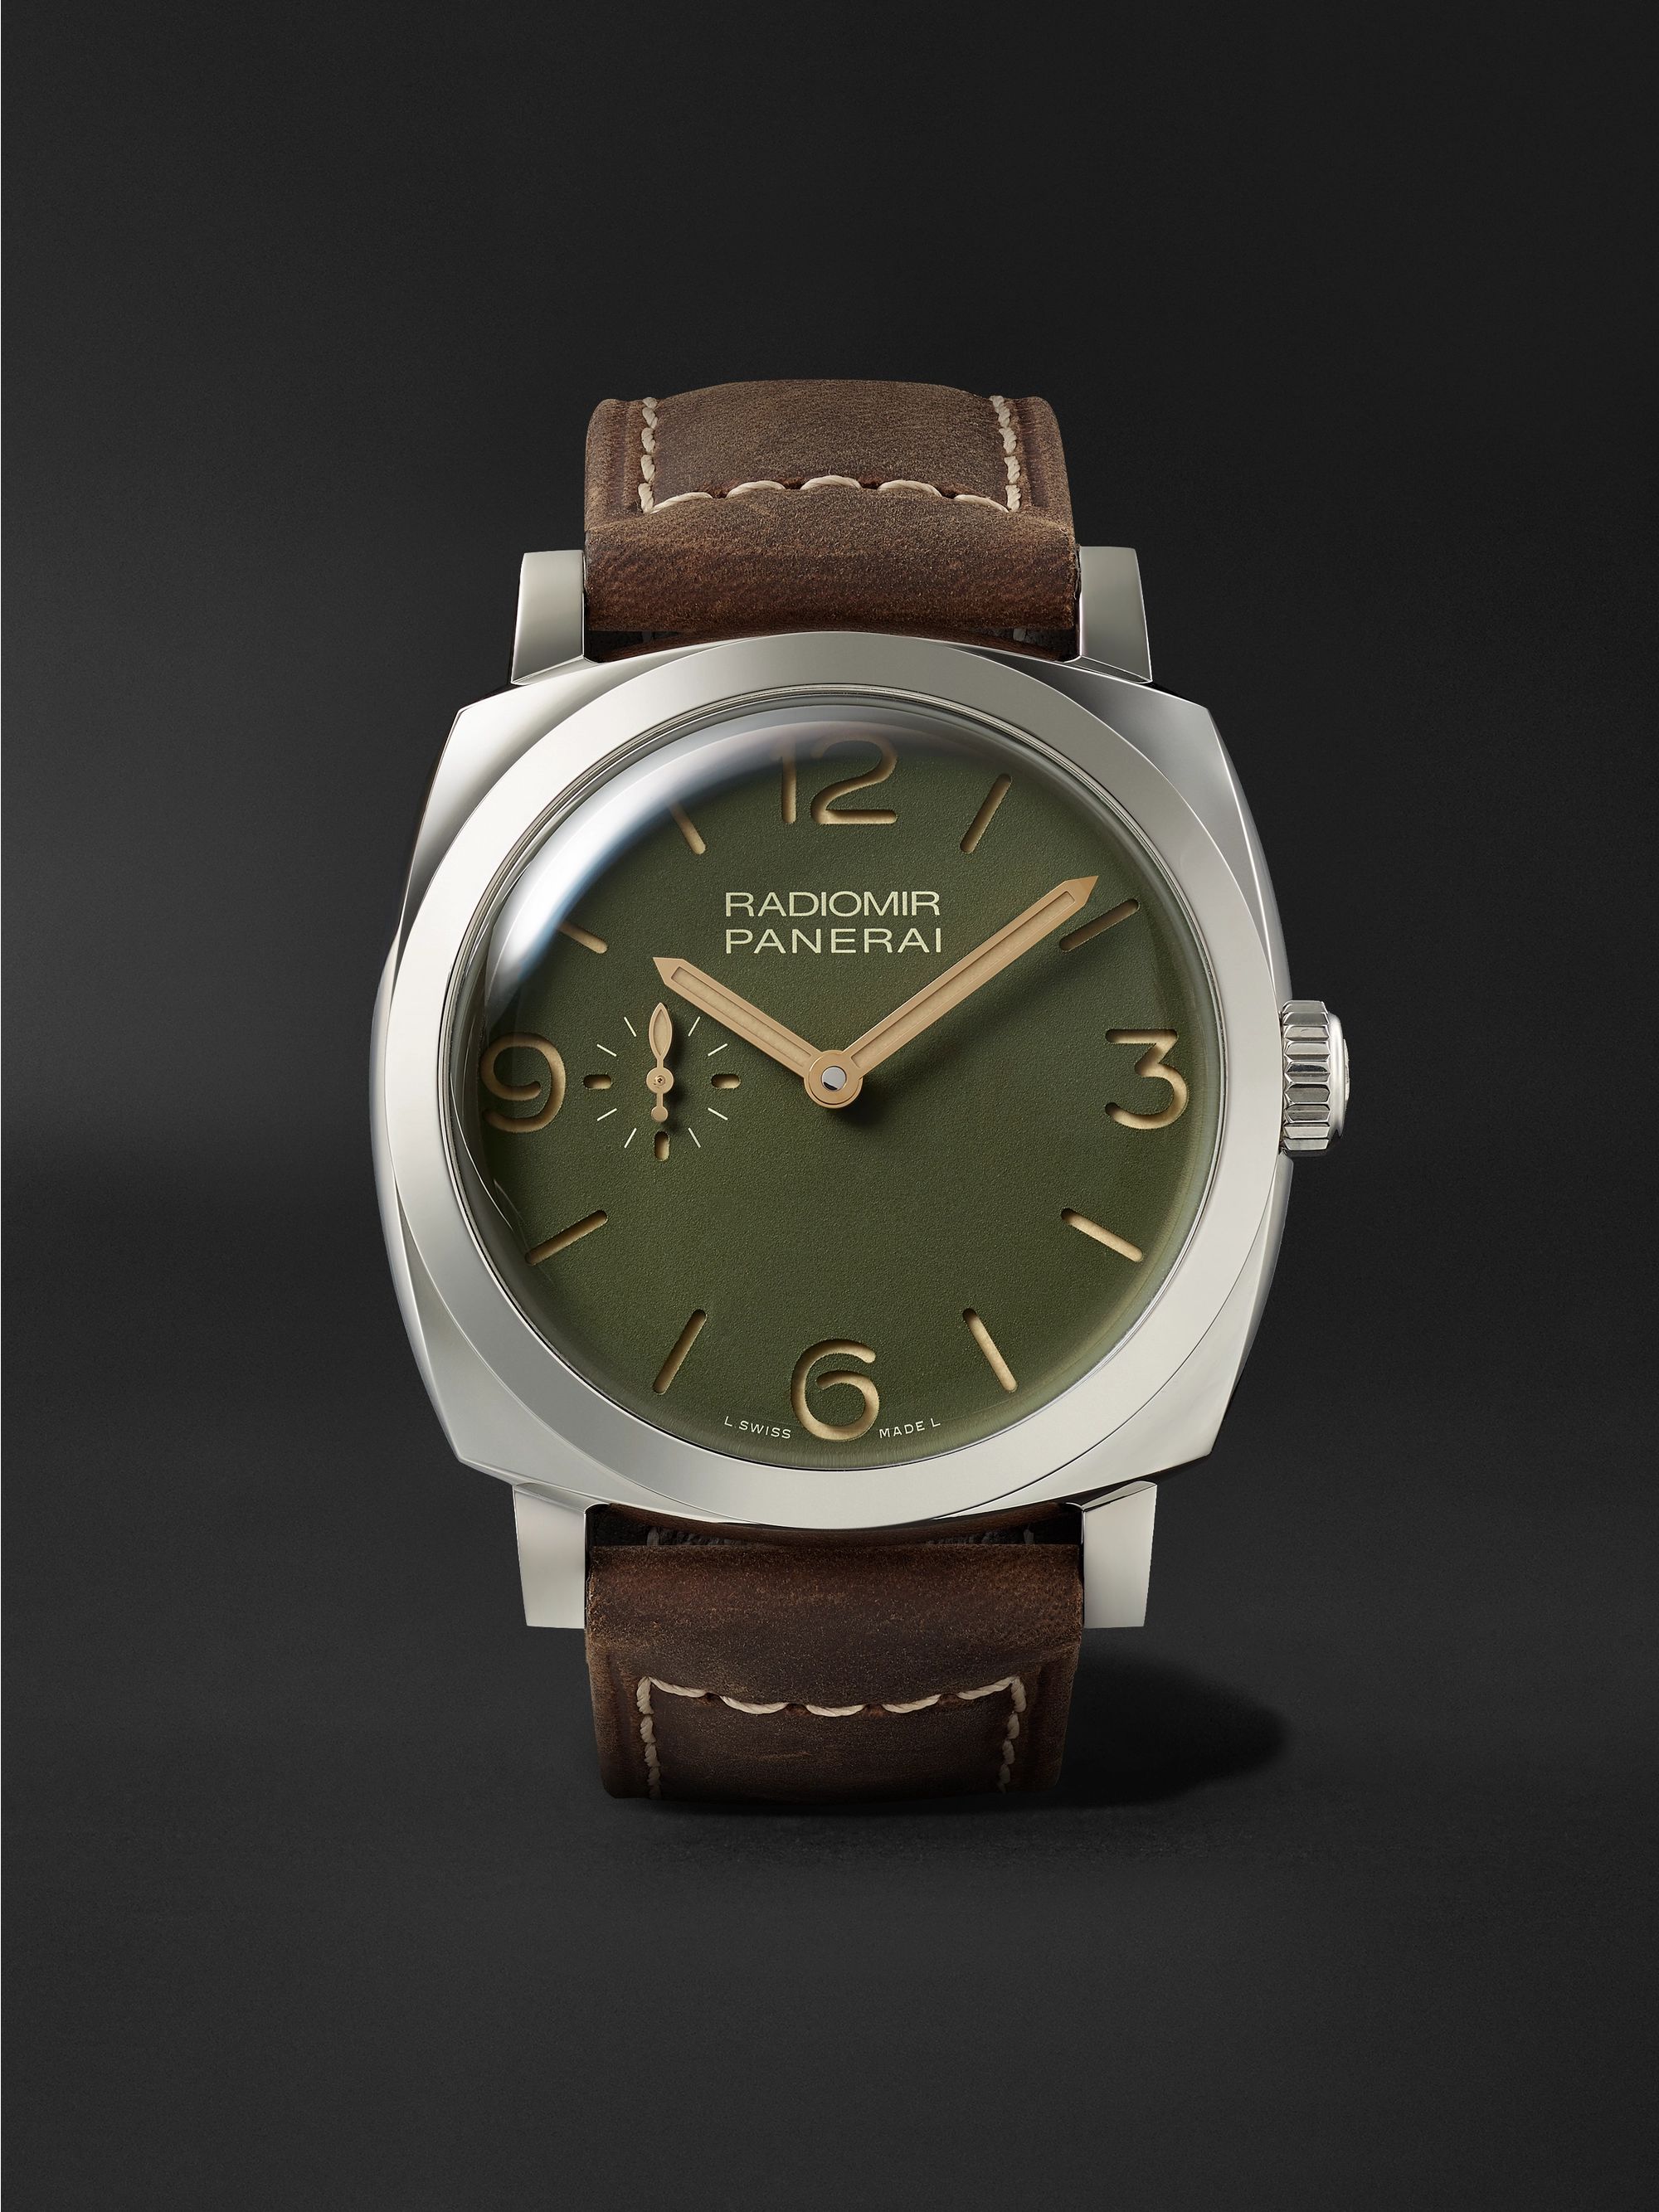 PANERAI Radiomir Automatic 45mm Stainless Steel and Leather Watch, Ref. No. PAM00995